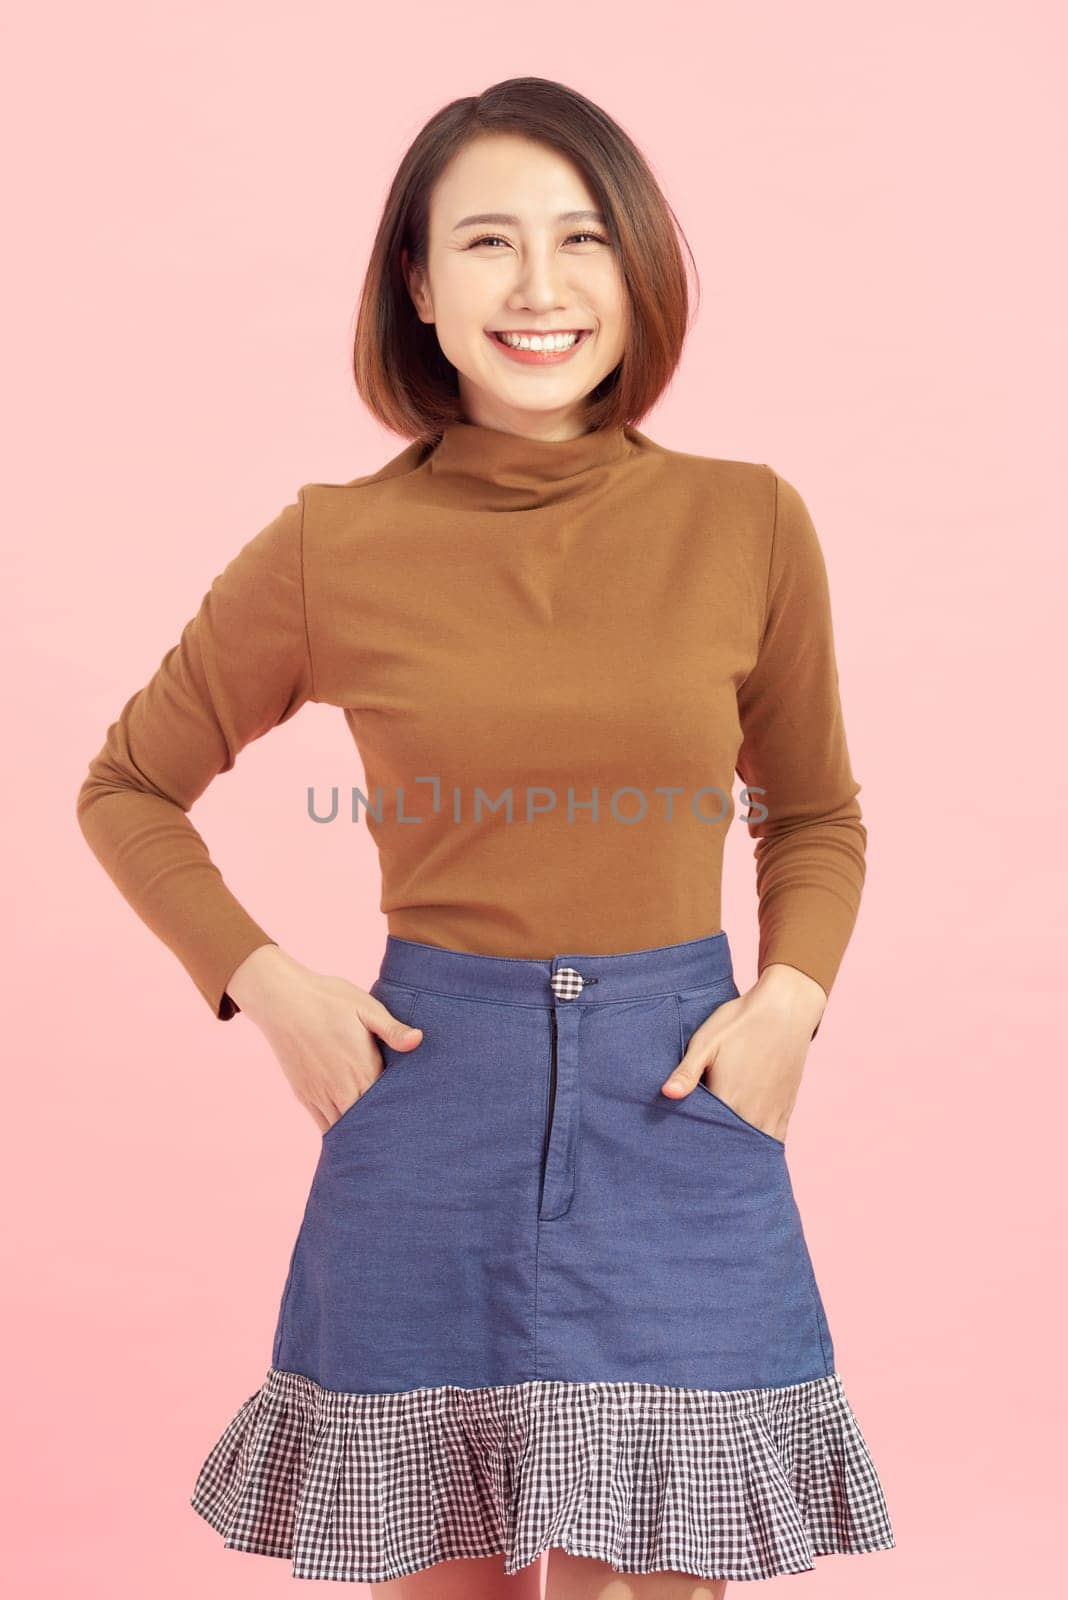 Cheerful young Asian businesswoman standing isolated on pink background.